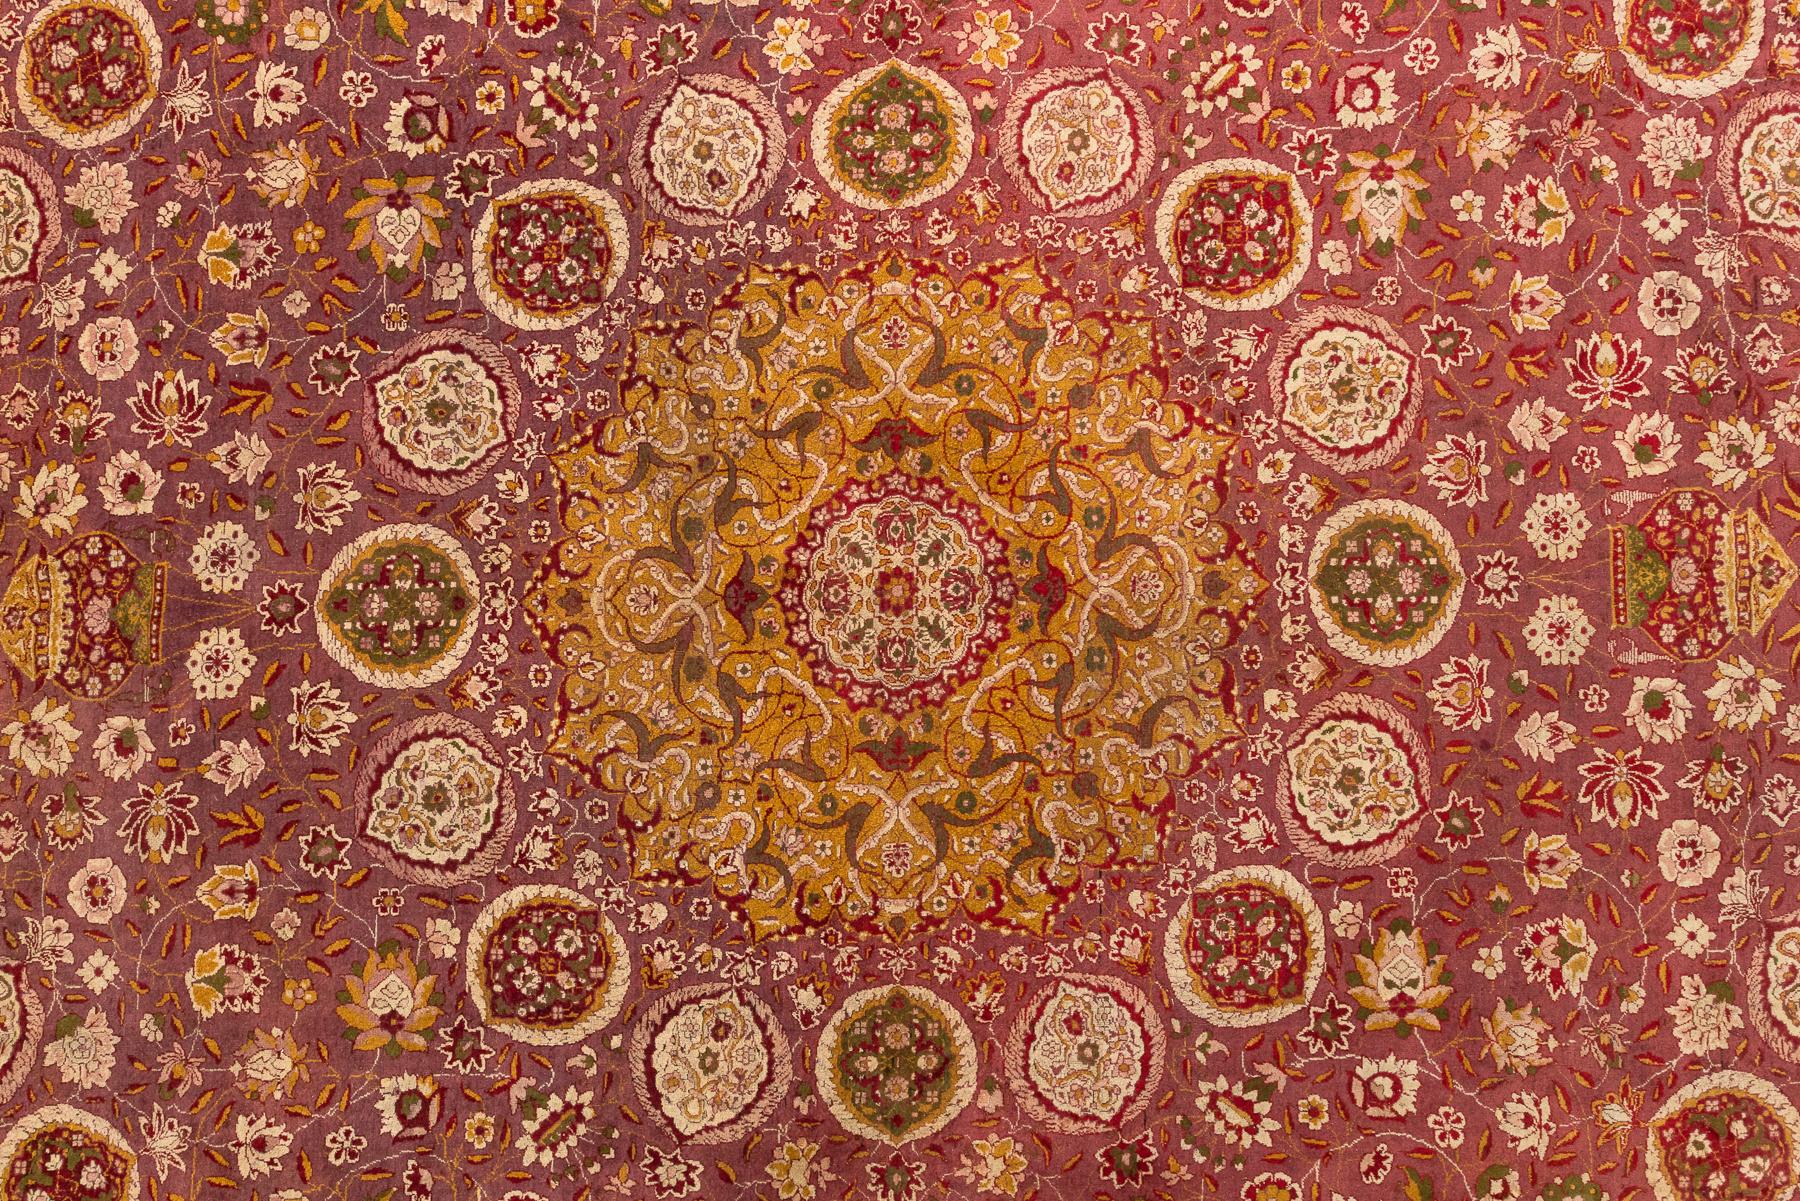 Agra - North India

This is a 120-year-old monumental Agra rug in excellent condition. This piece was inspired by the famous Persian rug, Ardabil, made in the 16th Century for the Persian court. The main field of the rug is woven in marsala. Sixteen